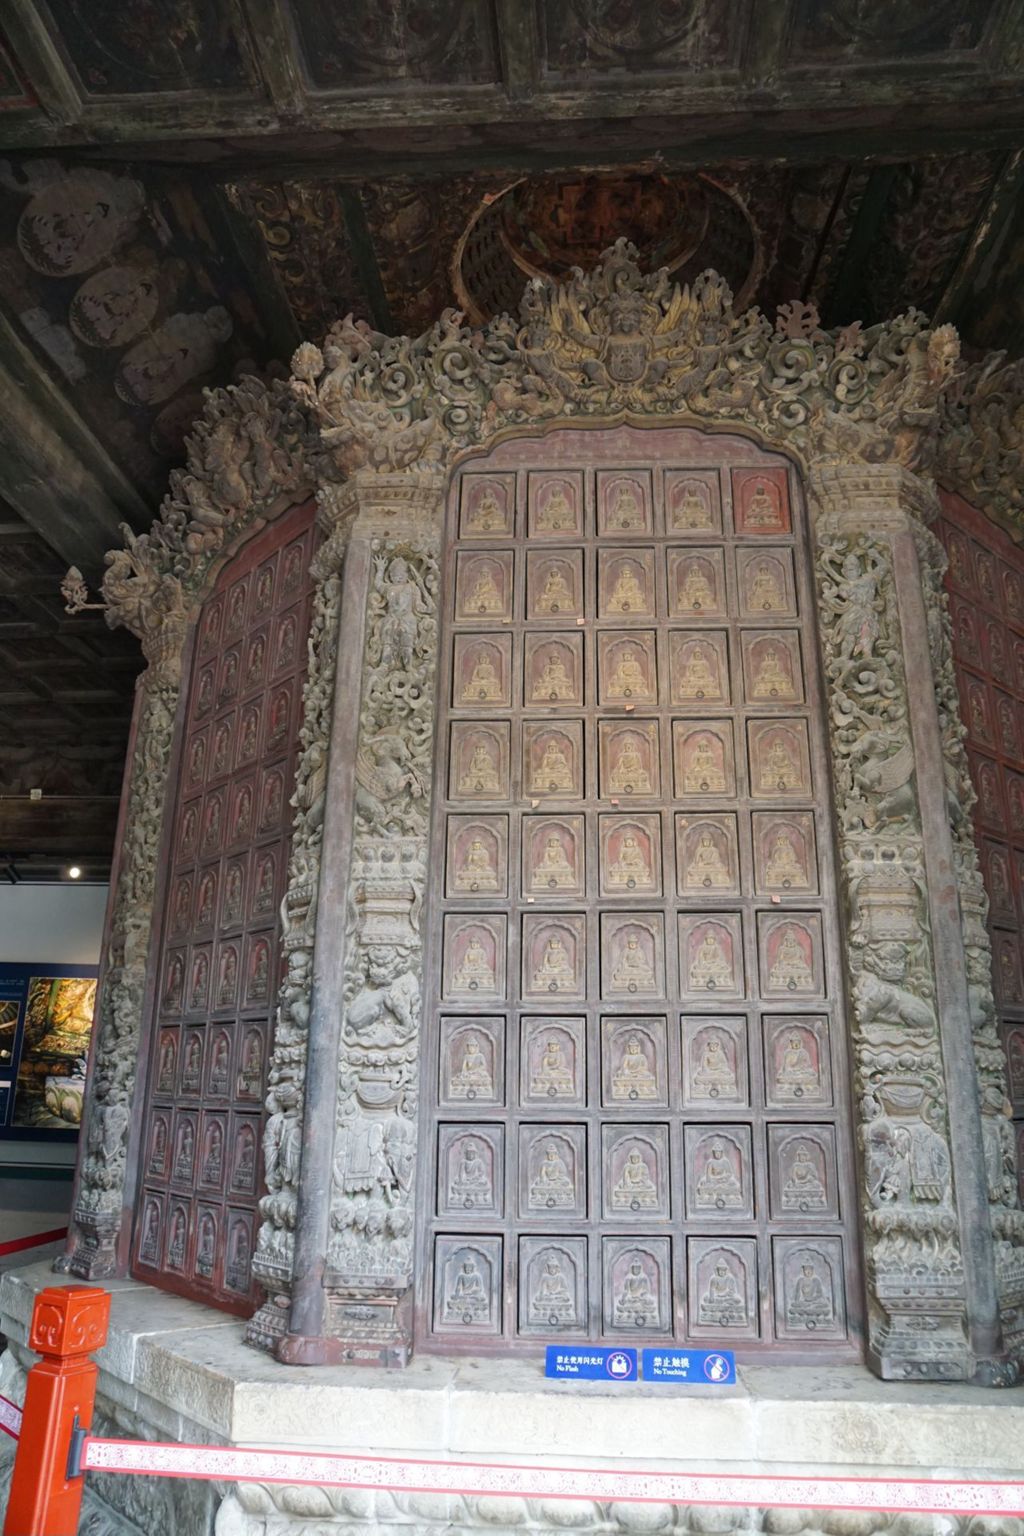 Miniature of Revolving Sutra Cabinet (Zhuanlun Jingzang, or Scripture Cabinet) in Sutra Hall (Zangdian, or Scripture Hall), front and side